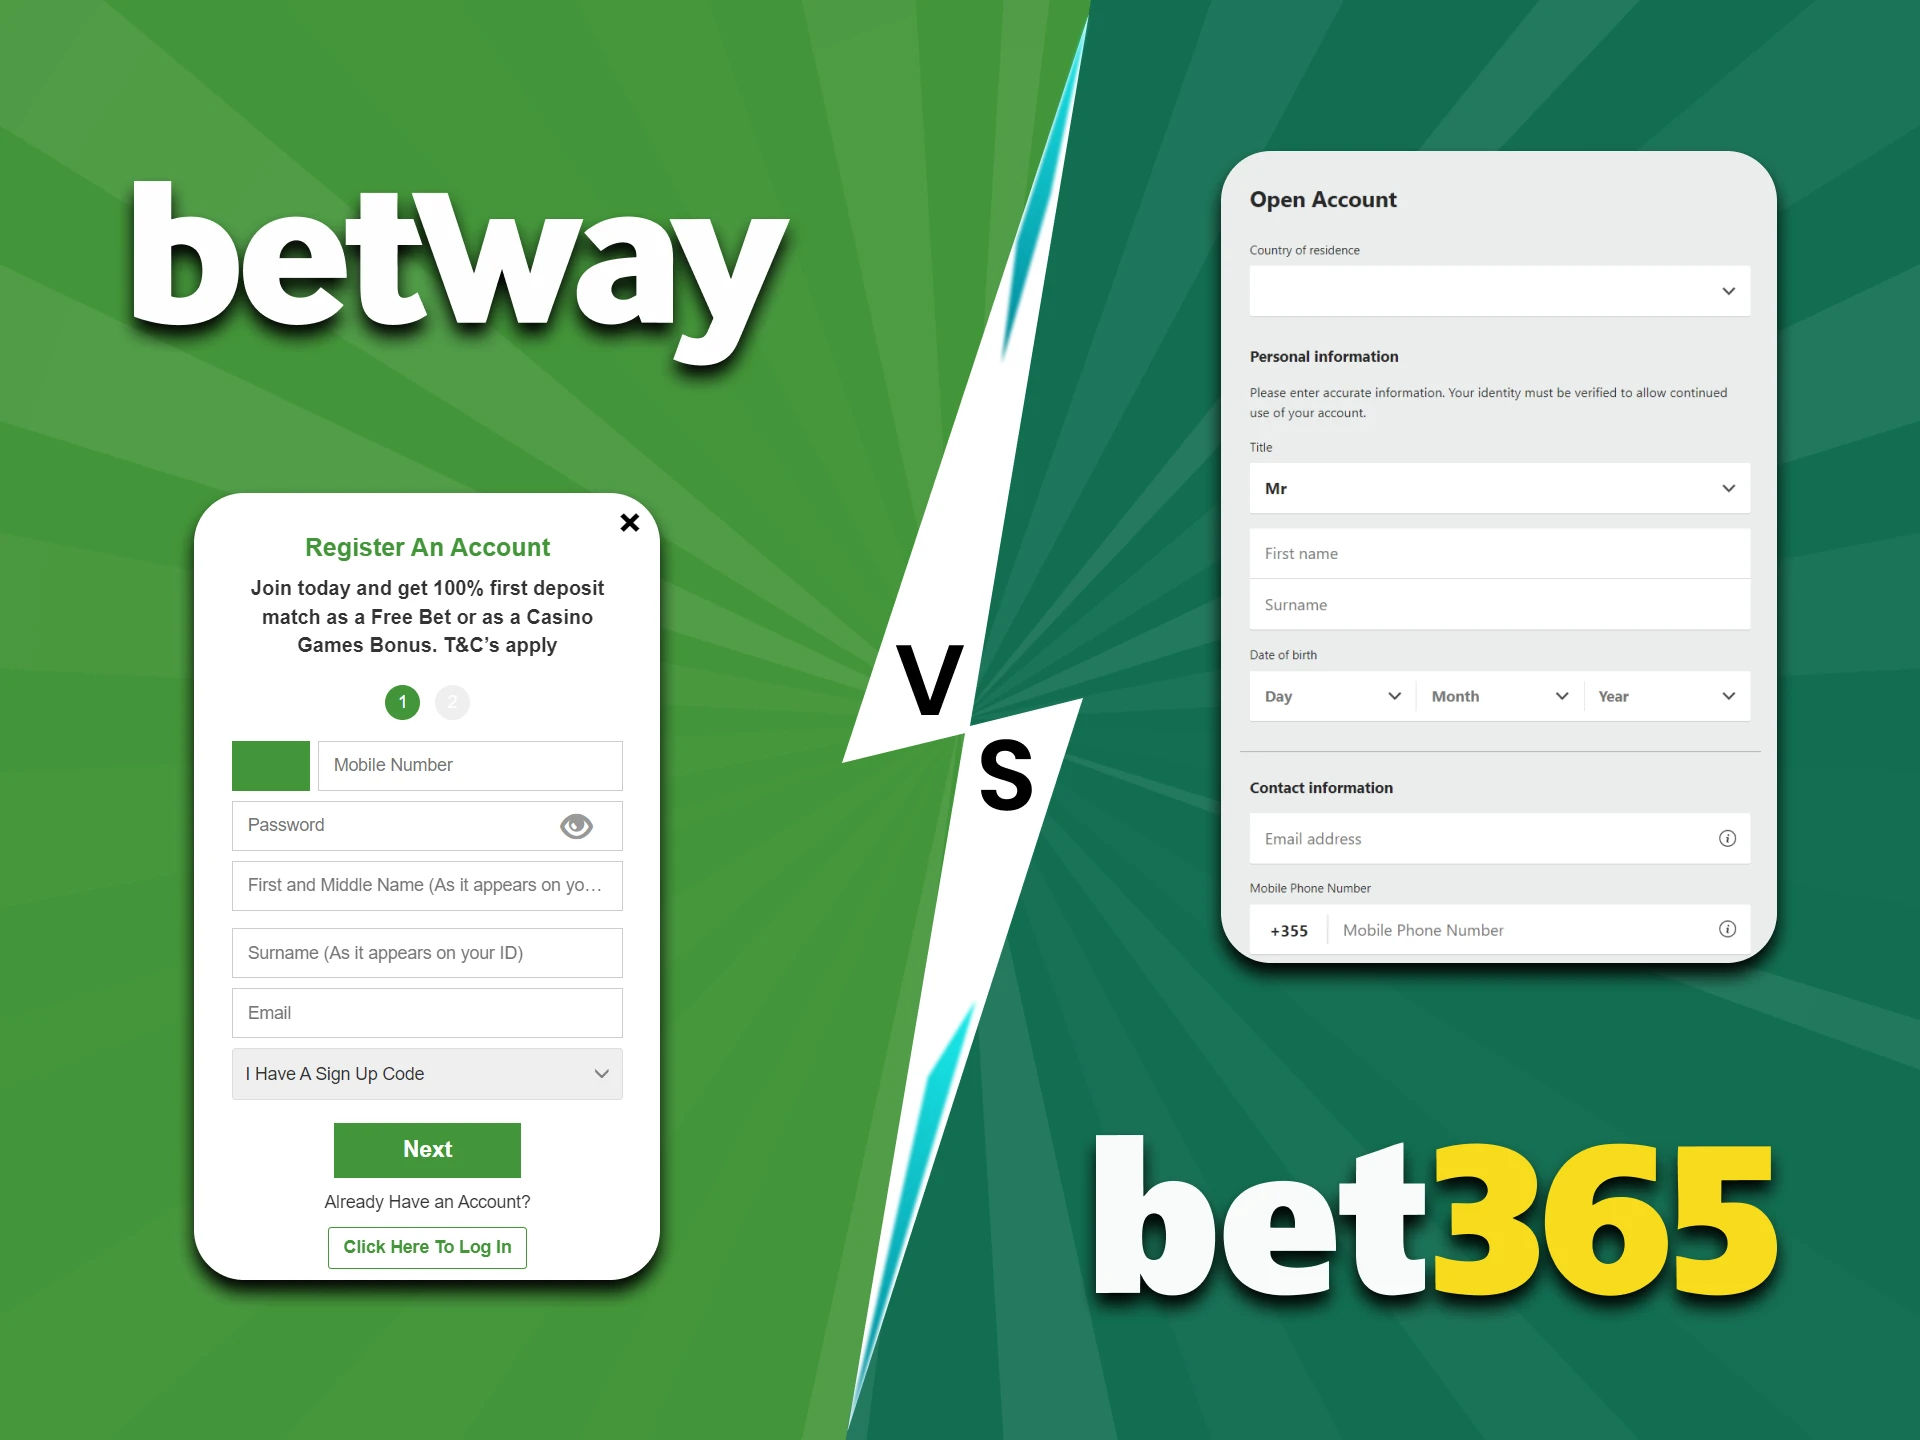 Find out the registration differences between Betway and Bet365.